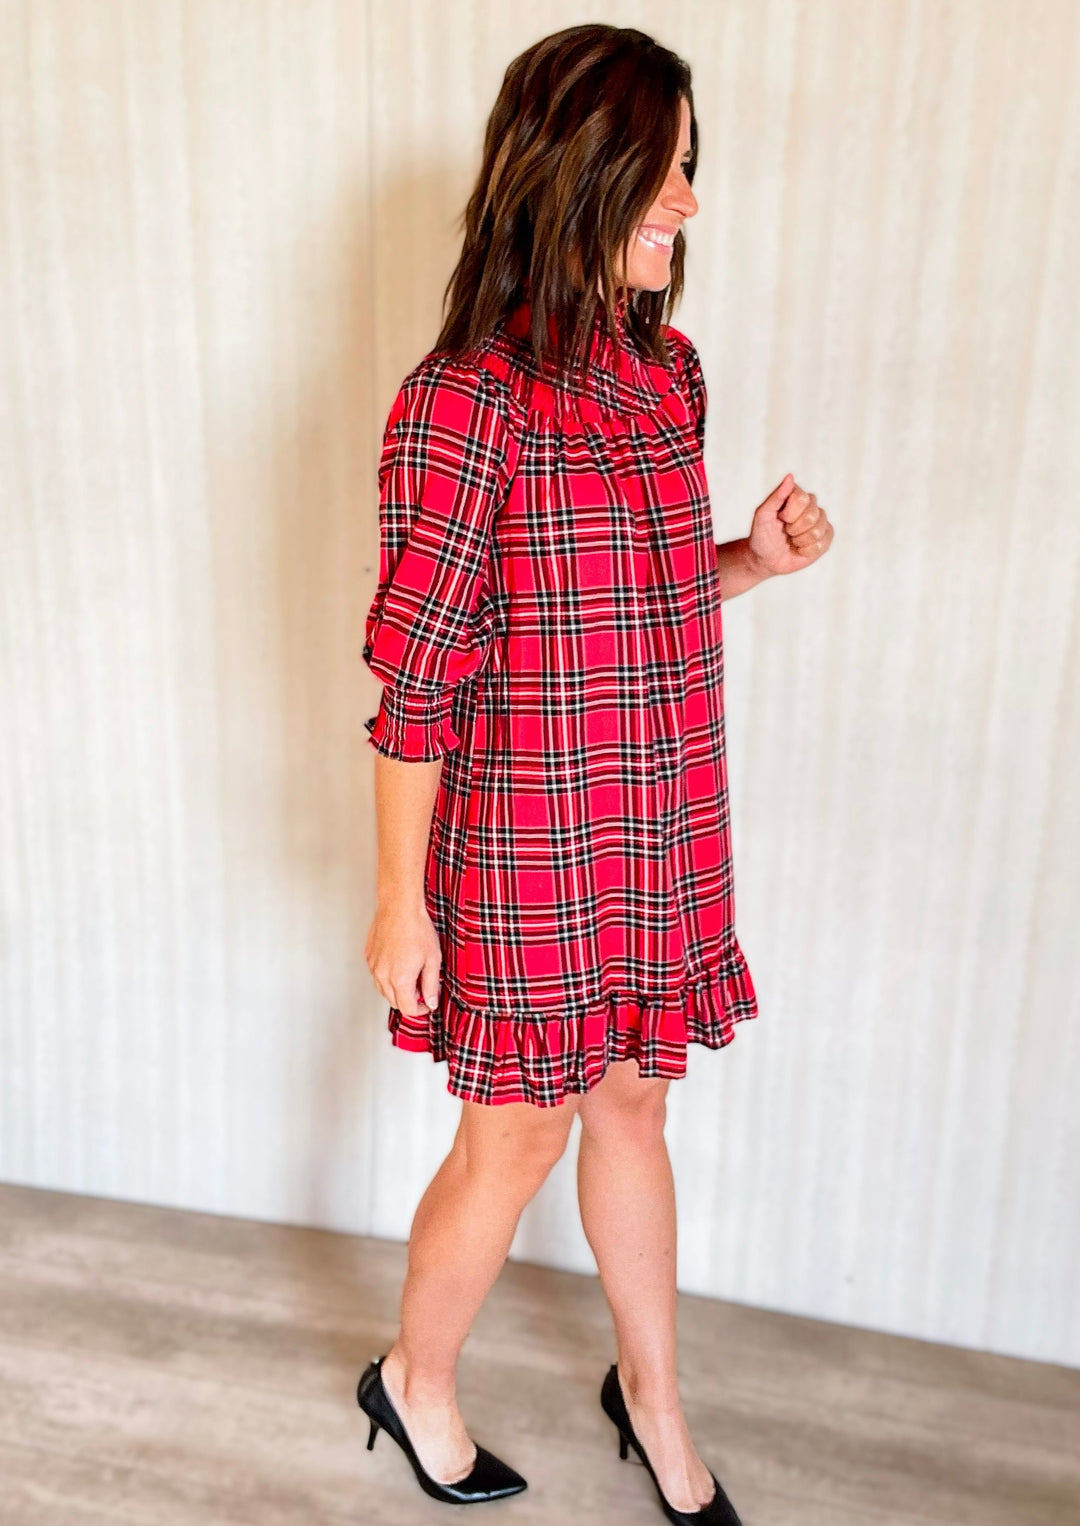 Holiday Dresses & Dresses for Christmas - Women's Red Plaid Smocked Neck Dress